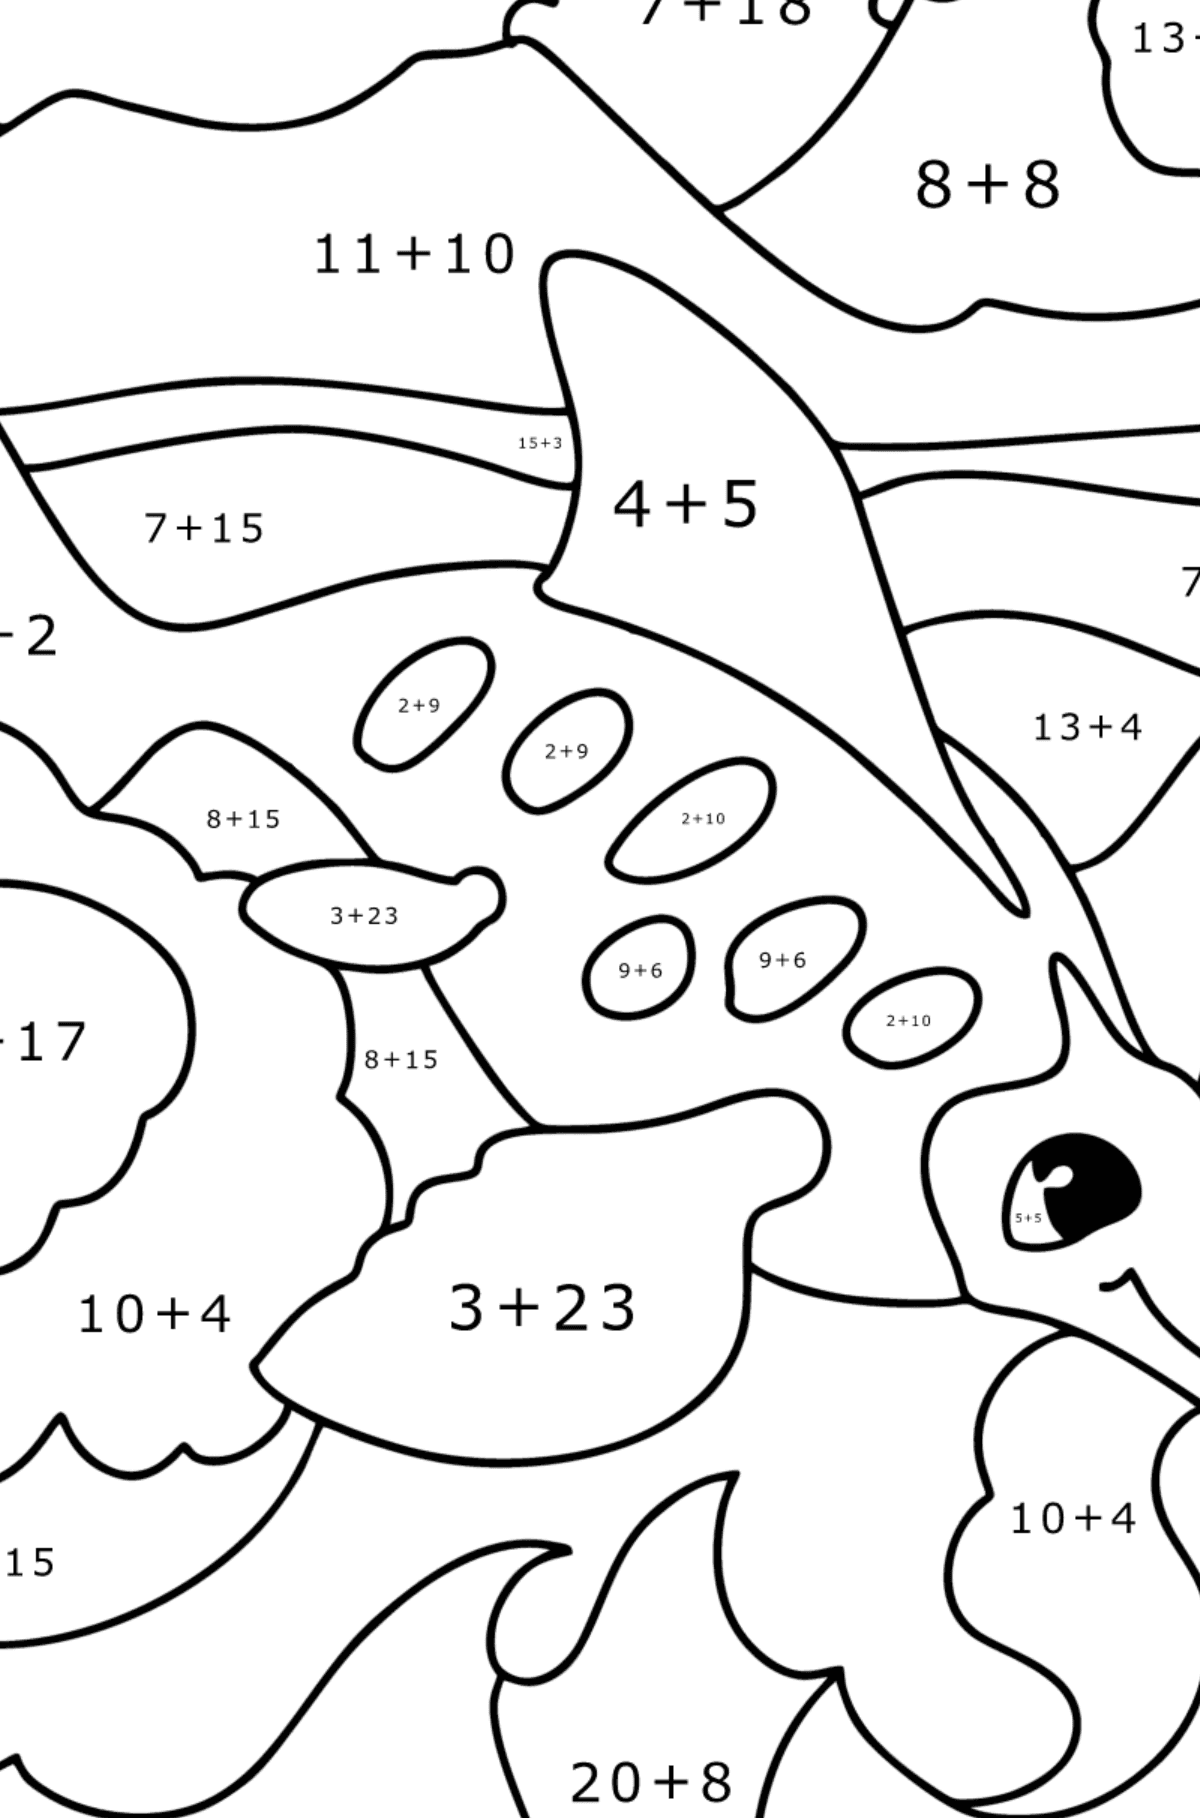 Ichthyosaur coloring page - Math Coloring - Addition for Kids